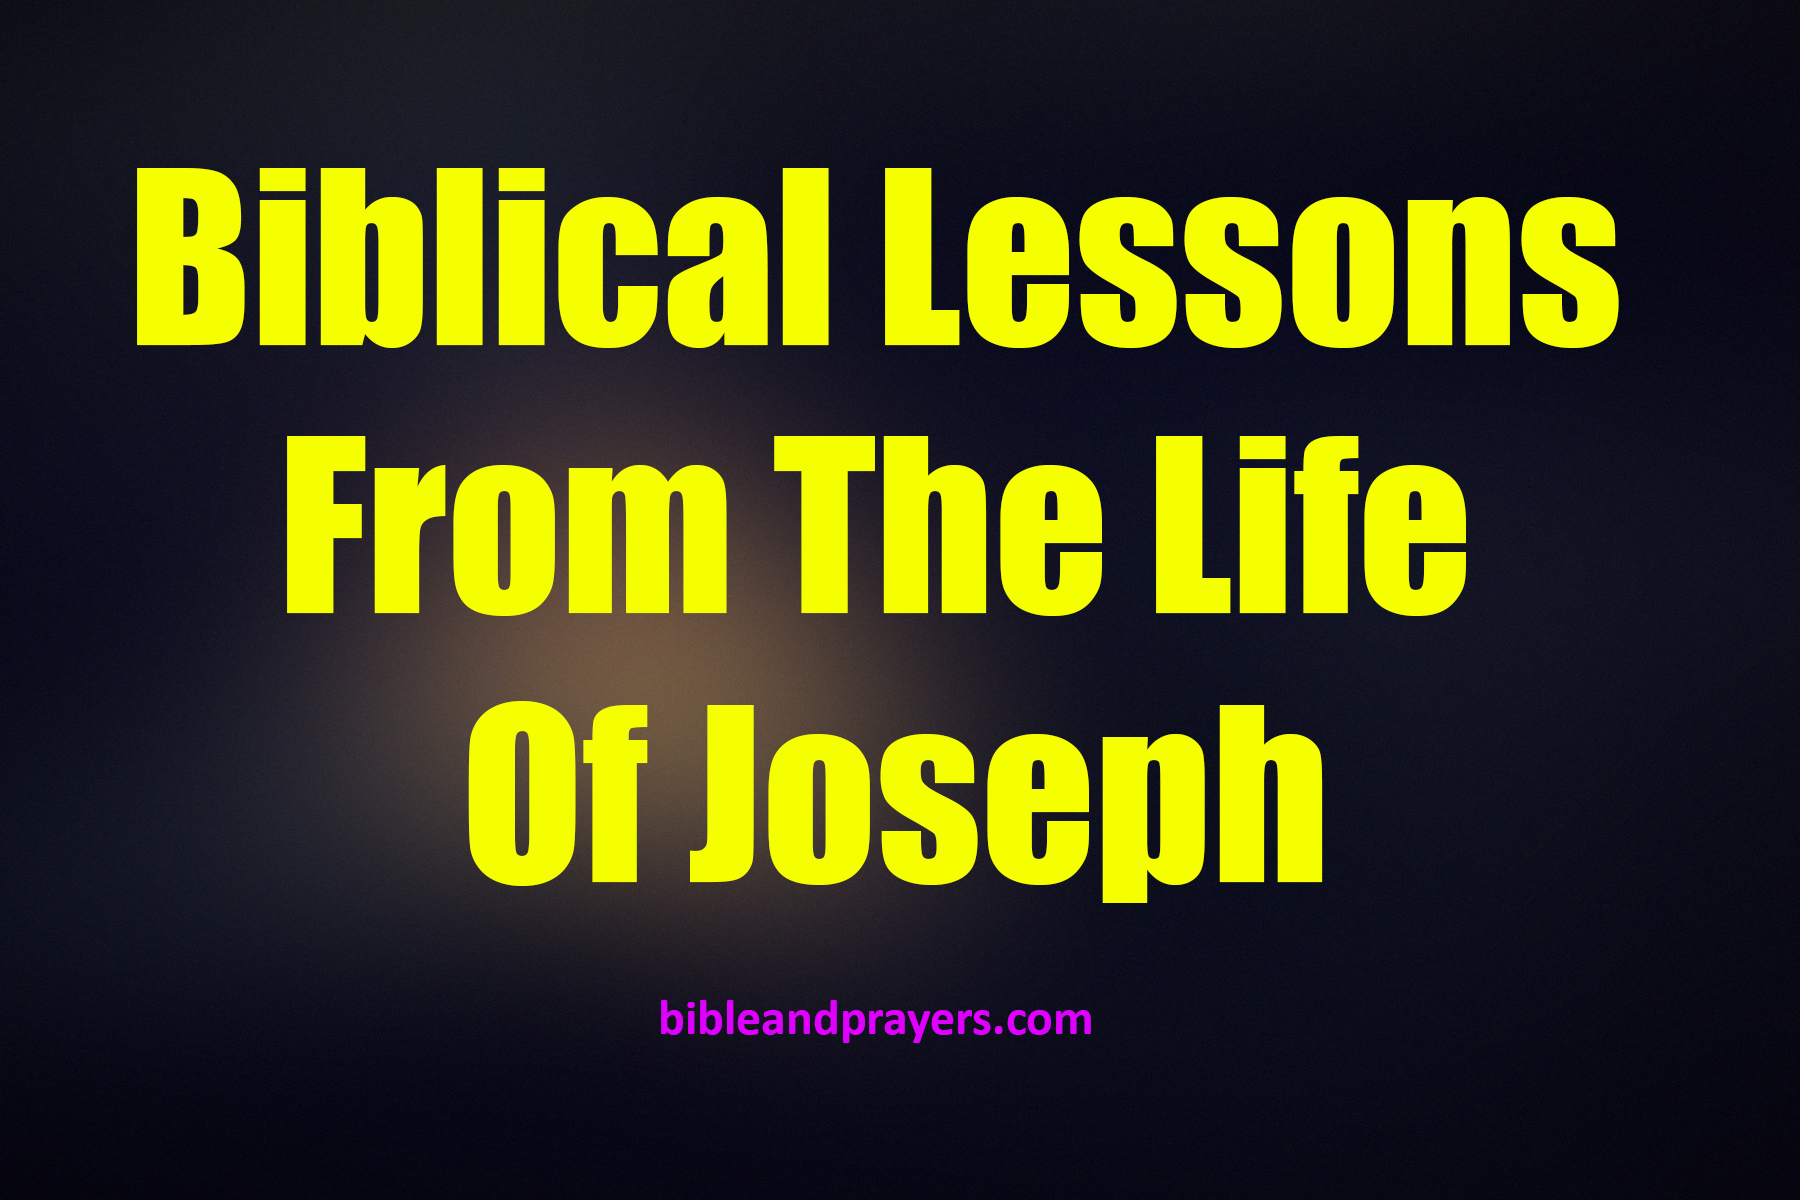 Biblical Lessons From The Life Of Joseph